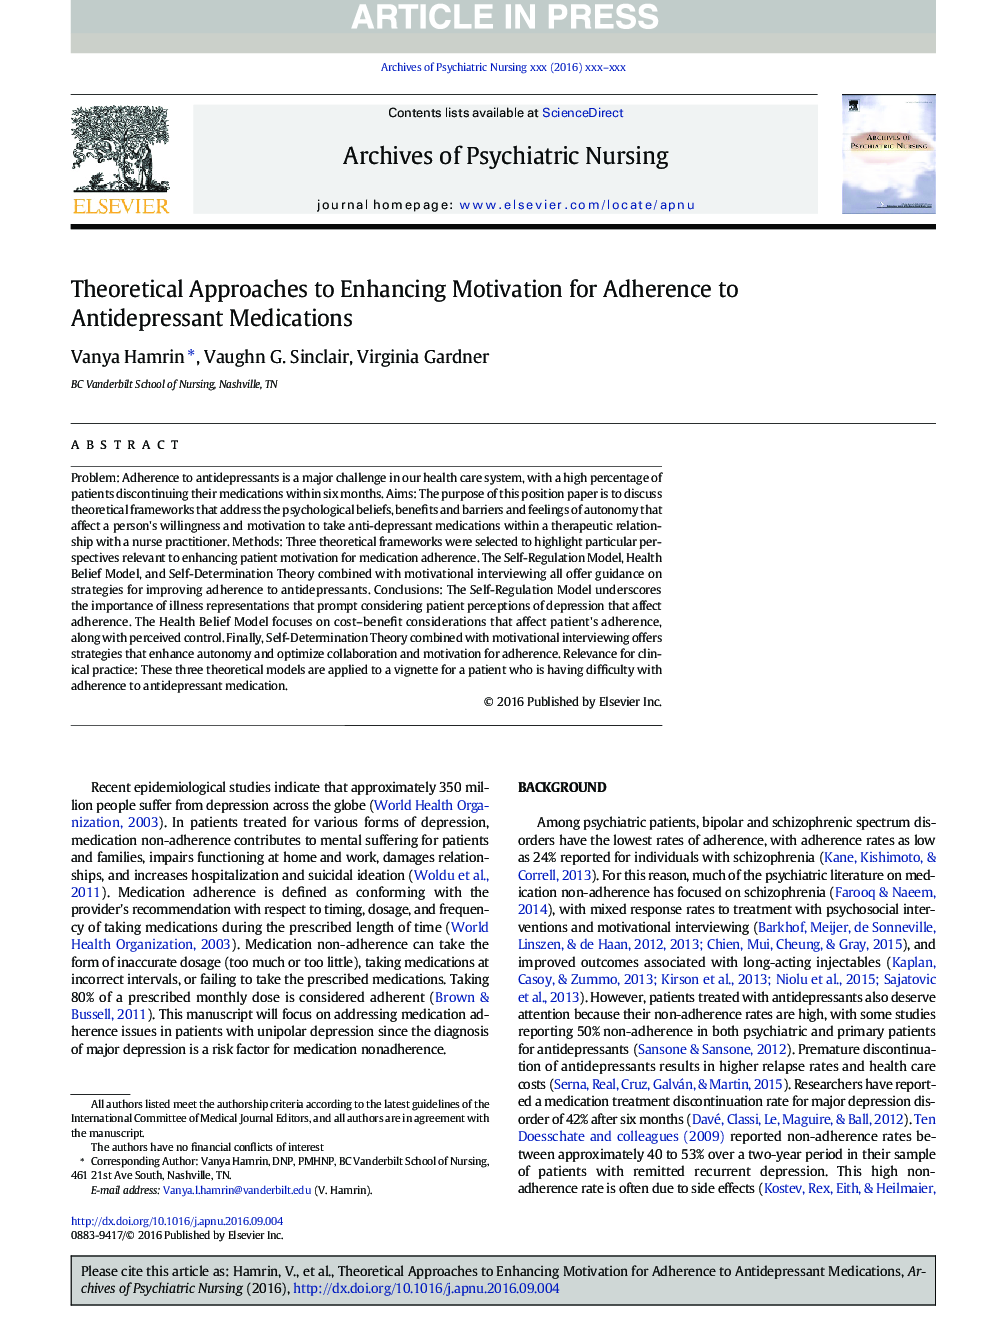 Theoretical Approaches to Enhancing Motivation for Adherence to Antidepressant Medications